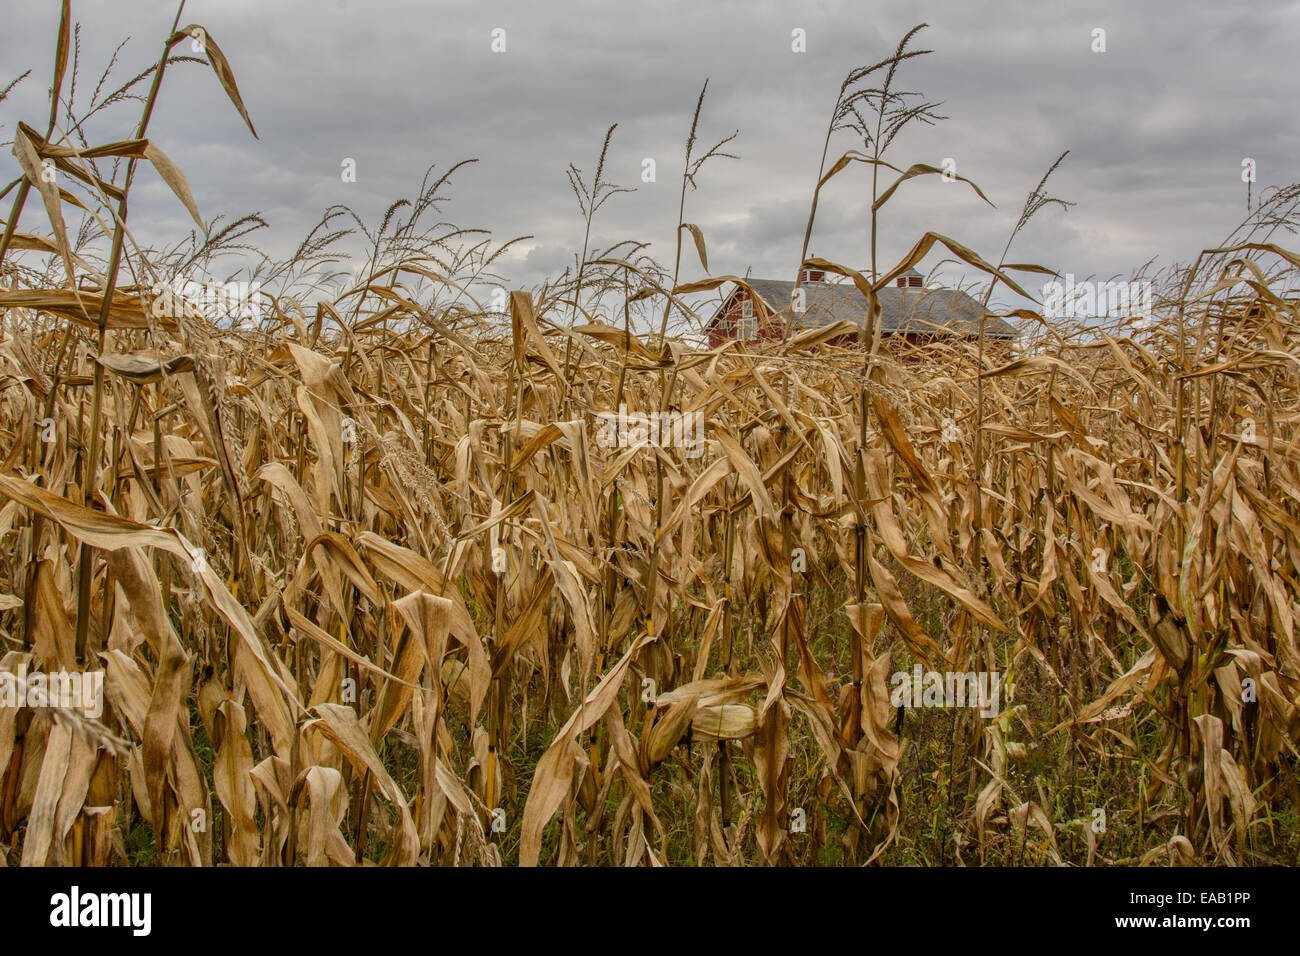 Fall corn field in autumn with a barn just invisible in distance with a dark ominous sky. Stock Photo